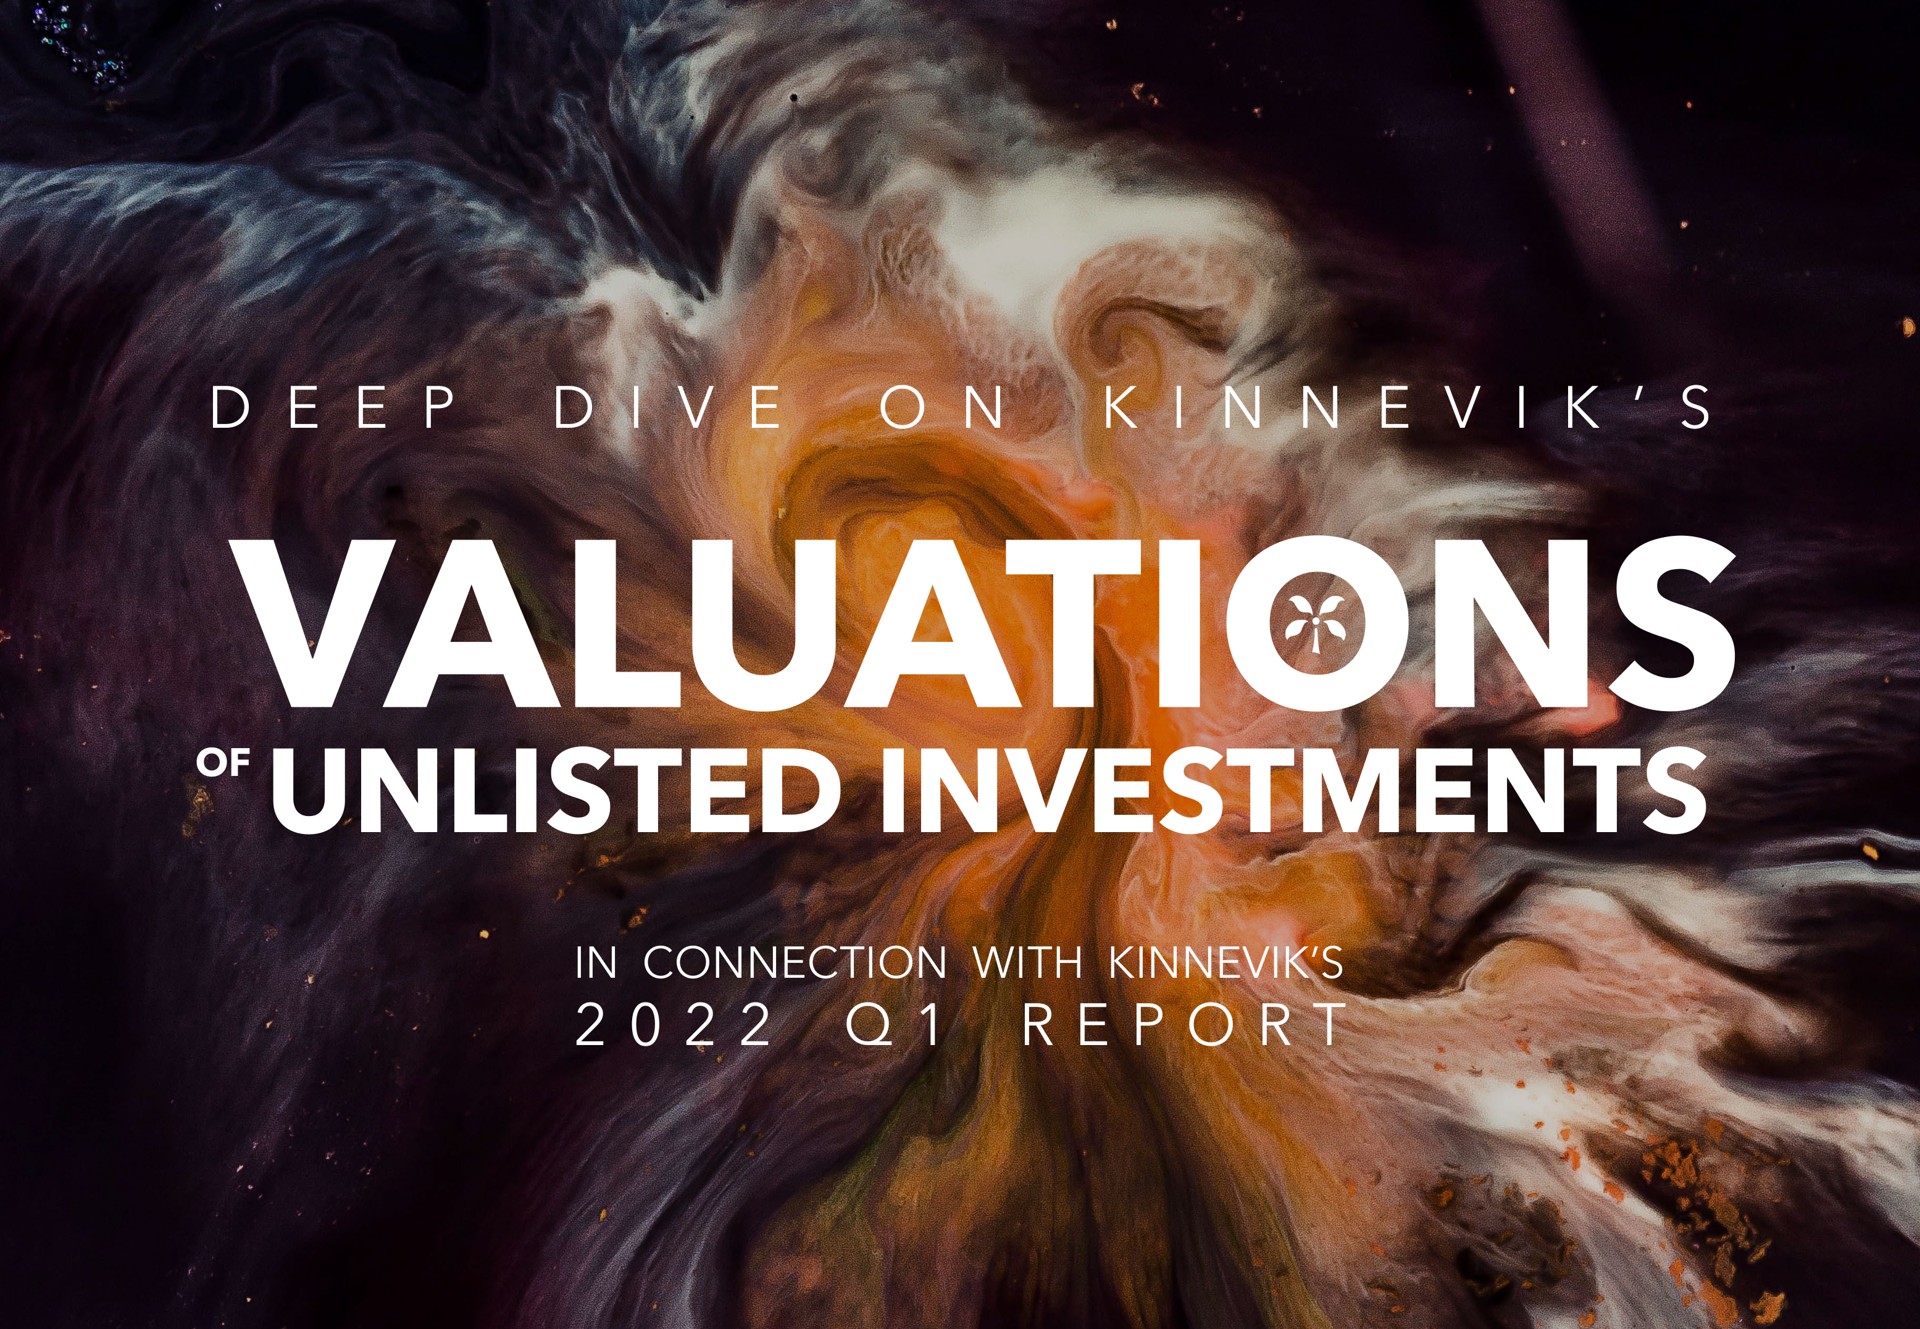 i i i valuations unlisted investments in connection with | Kinnevik